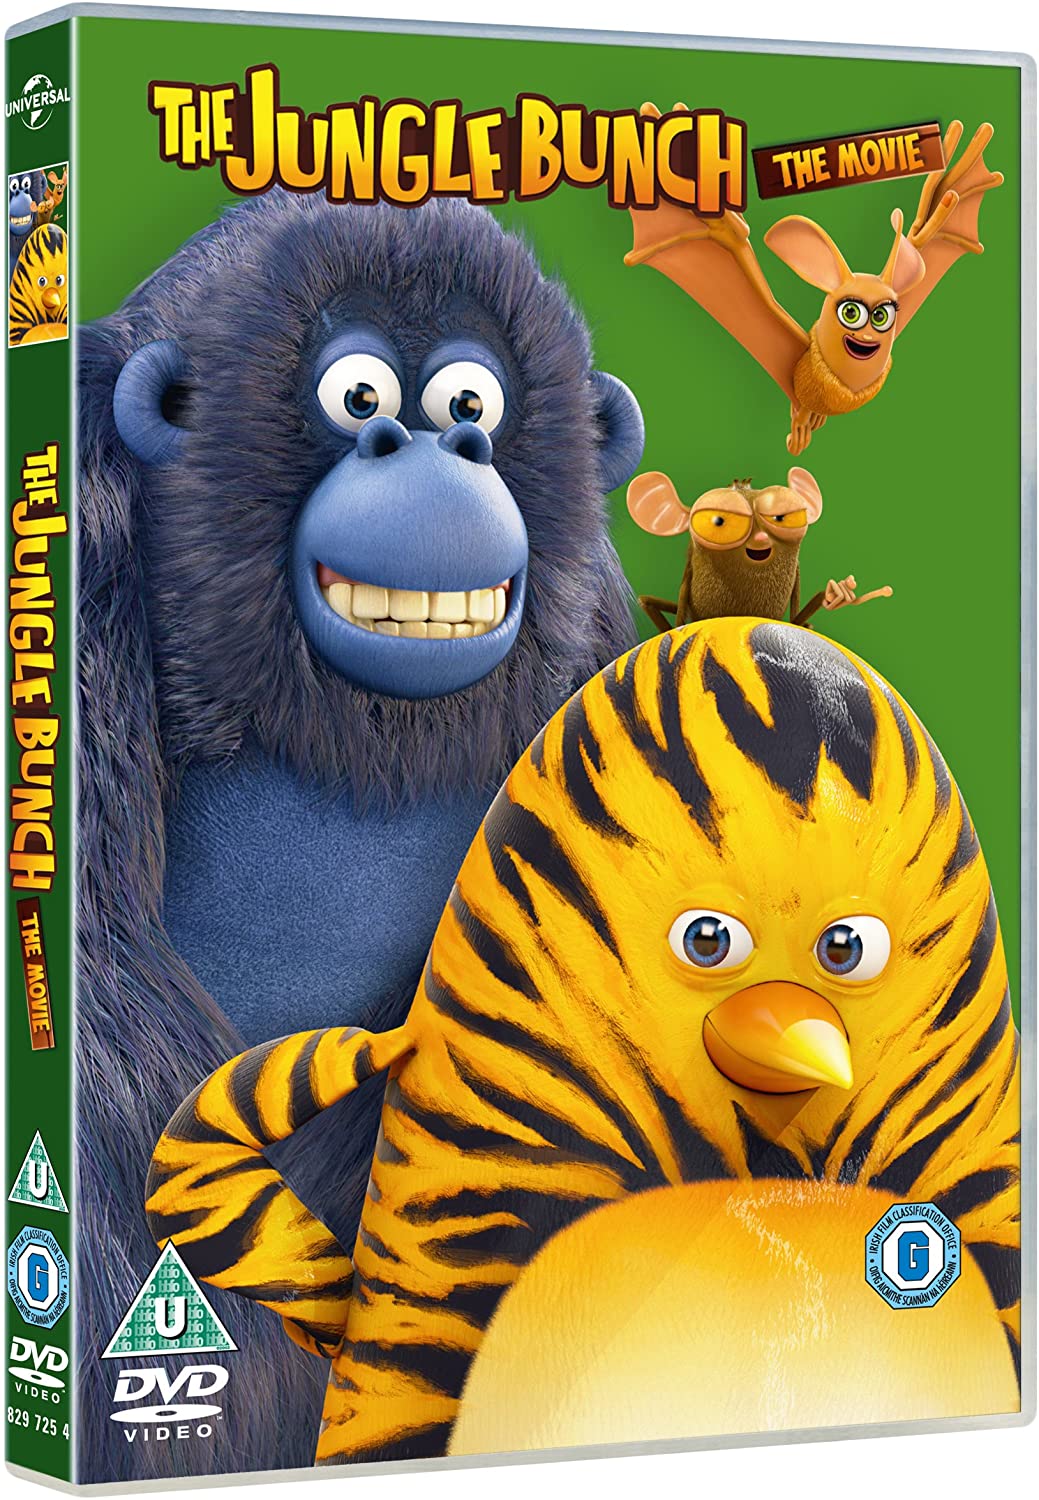 The Jungle Bunch: The Movie [2012] [DVD]